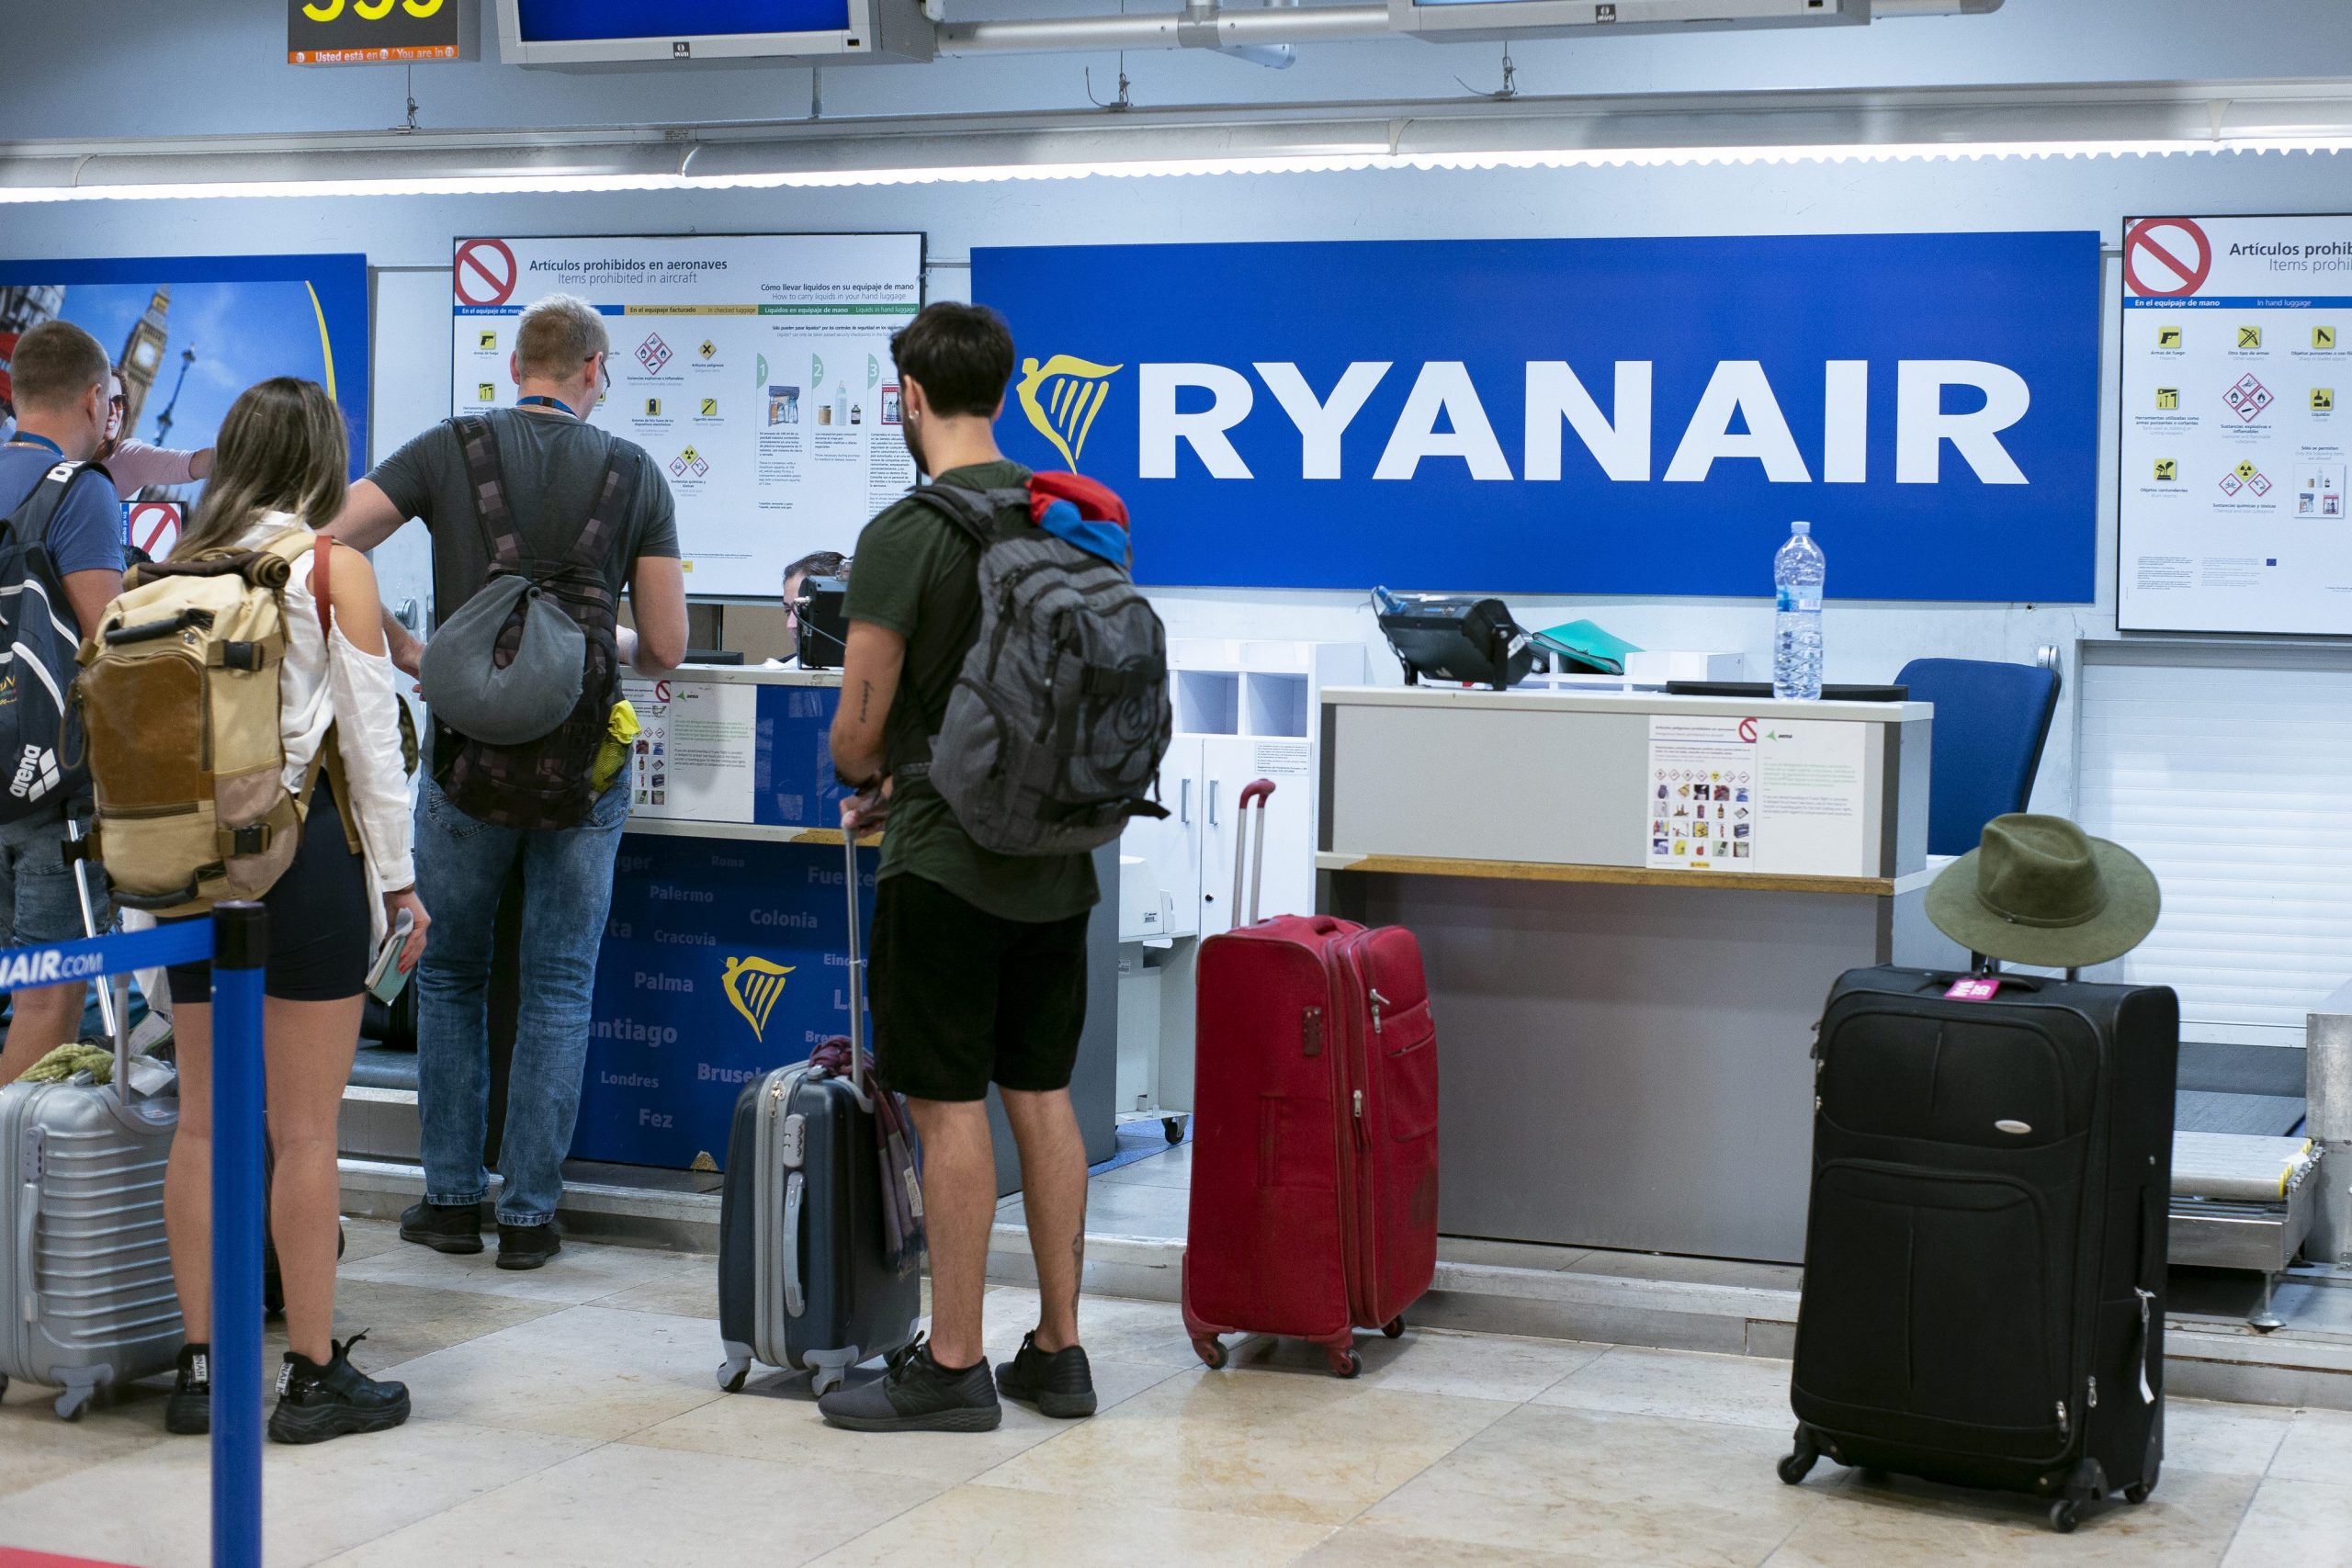 Ryanair summer holiday flights threat as unions in Spain and Europe plan strikes